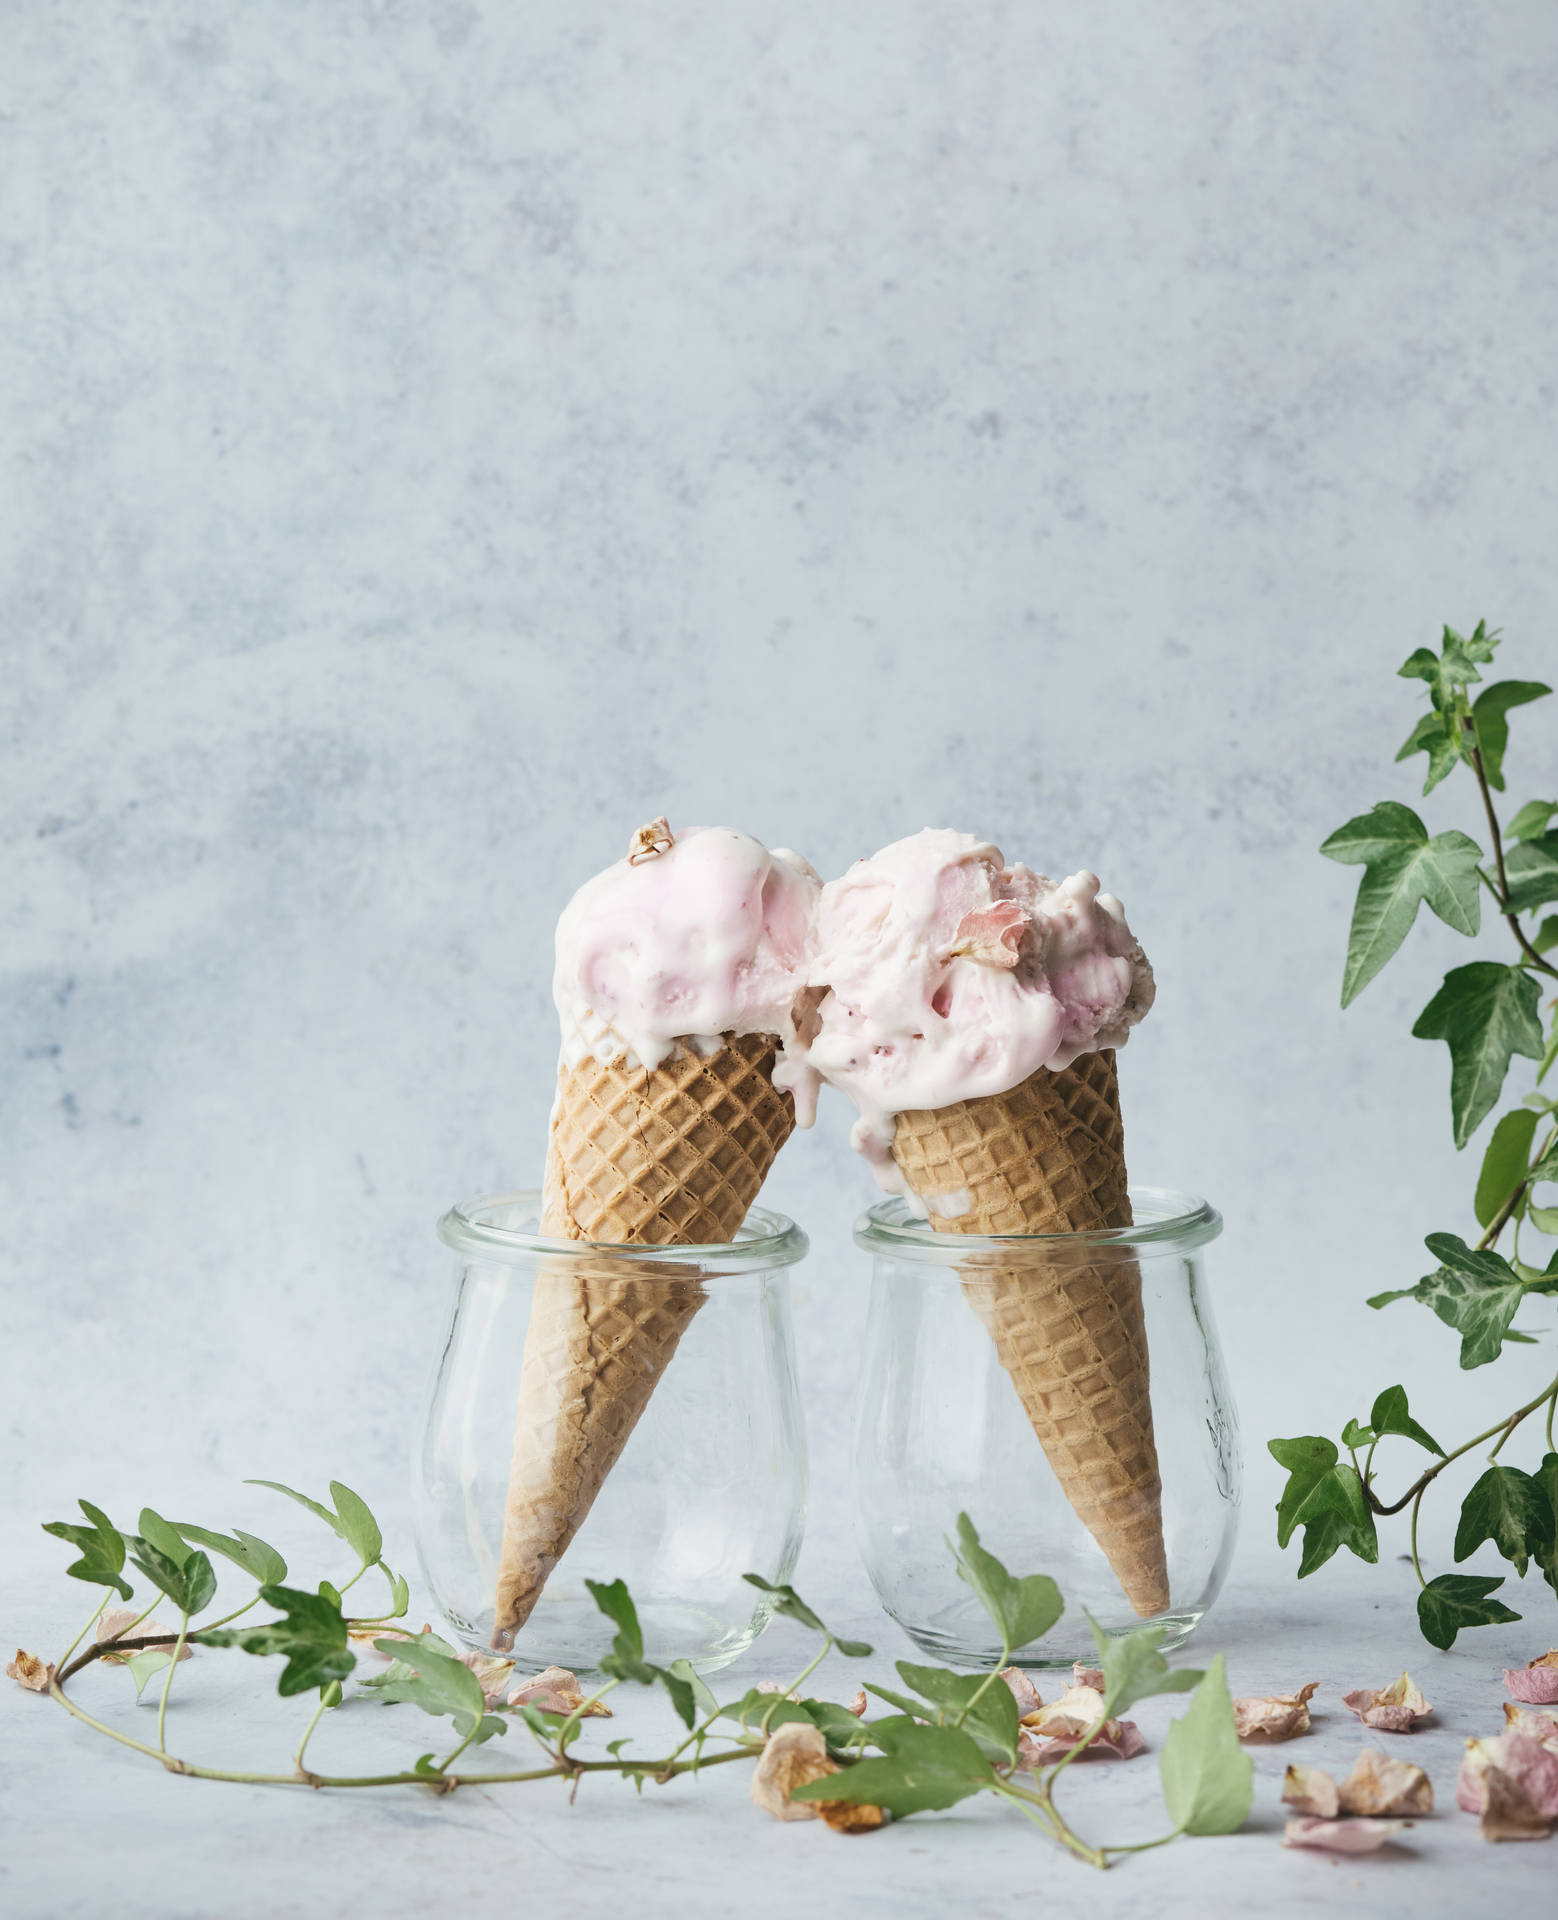 Ice Cream 4403X5425 Wallpaper and Background Image